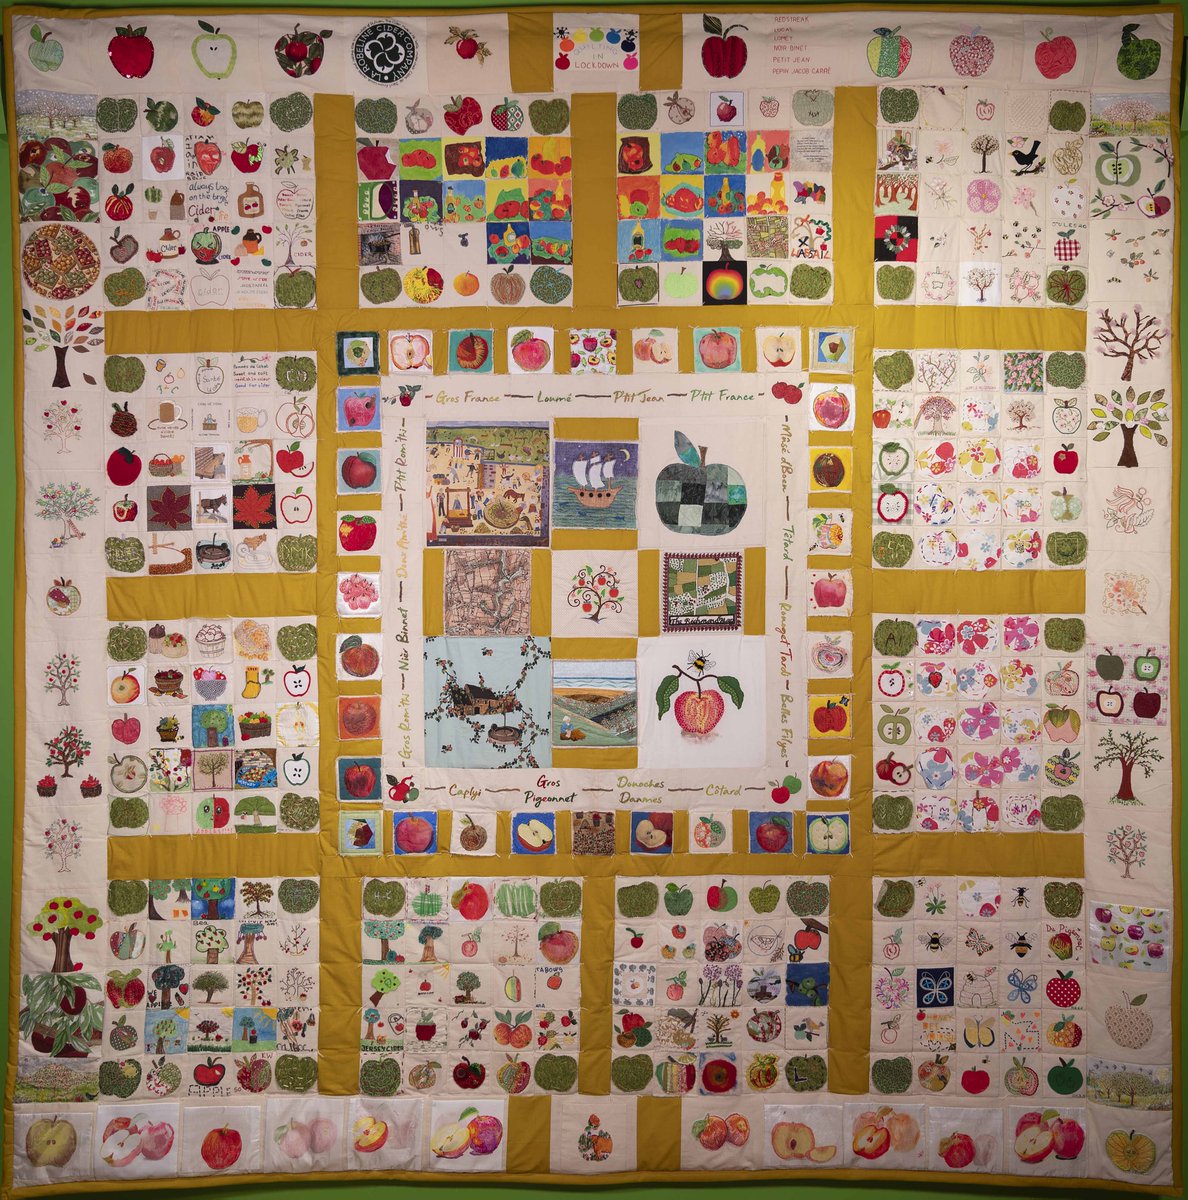 #OTD one year ago, the beautiful Jersey Cider Apple #Quilt – la couvèrtuthe pitchie d’la pomme à cidre Jèrriaise – was completed. Happy anniversary to everyone who contributed to this wonderful #Community project! #Apples #Cider #Handmade #Patchwork #Volunteers #OurIslandStory